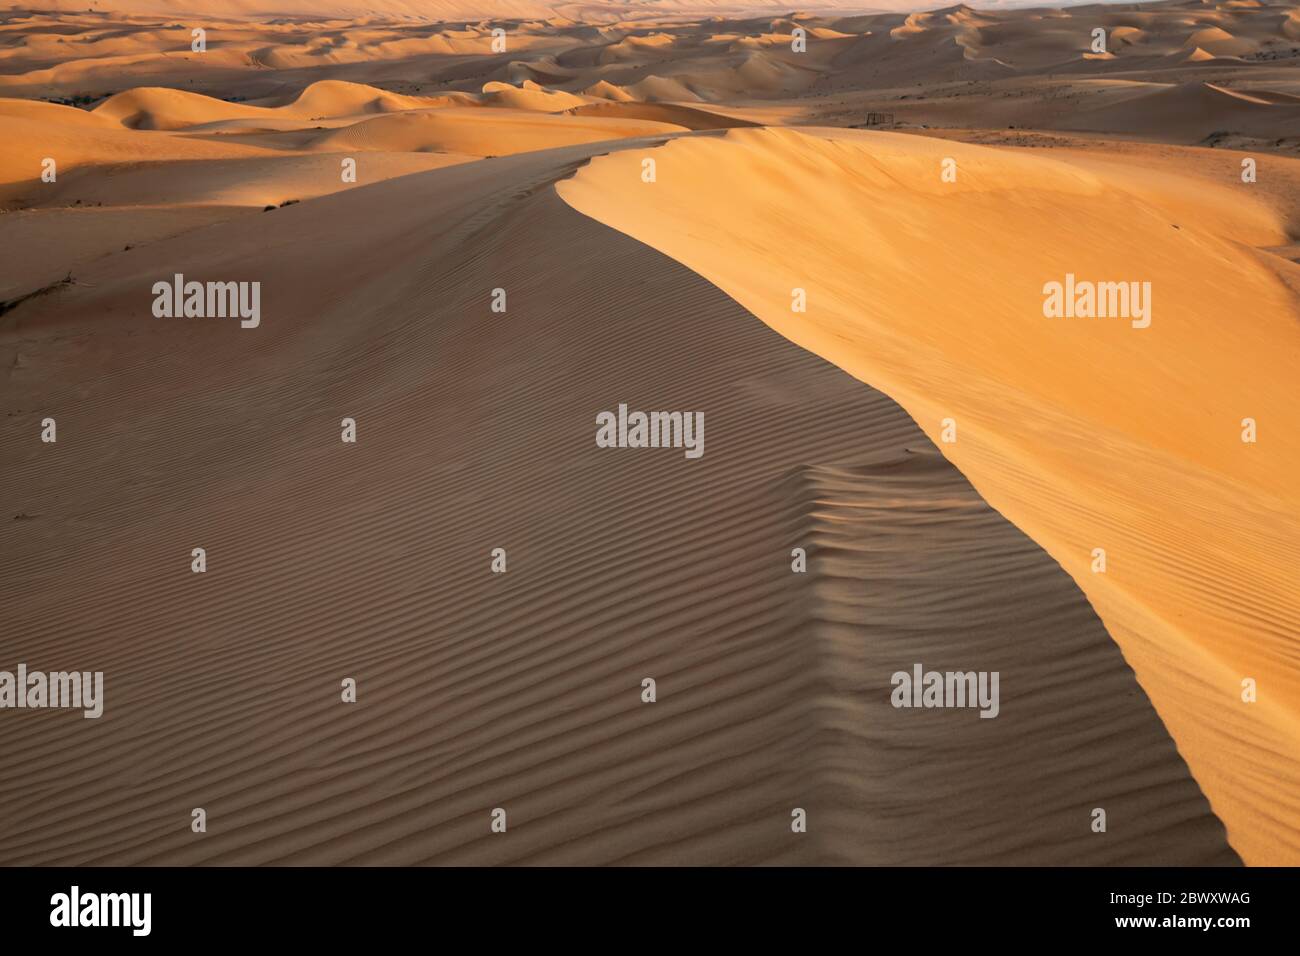 Contrast of dune crest in Wahiba Sands desert in Oman in warm late afternoon light Stock Photo